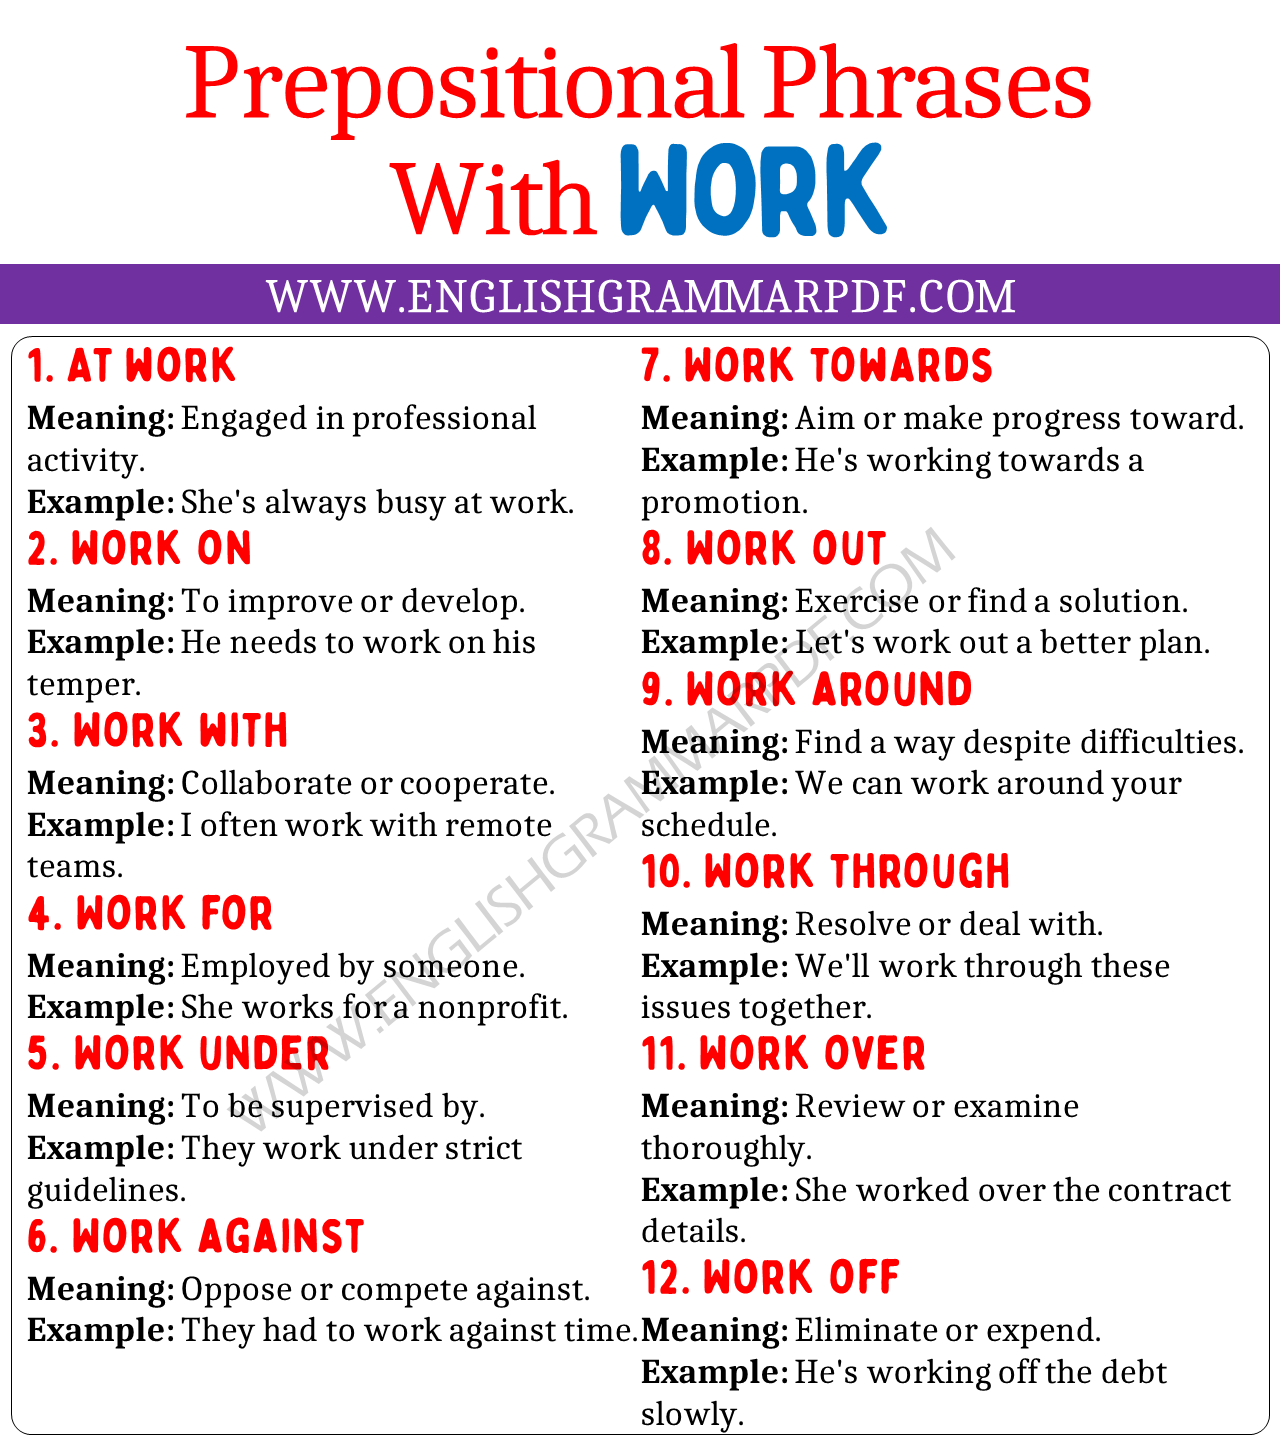 prepositional phrases with work